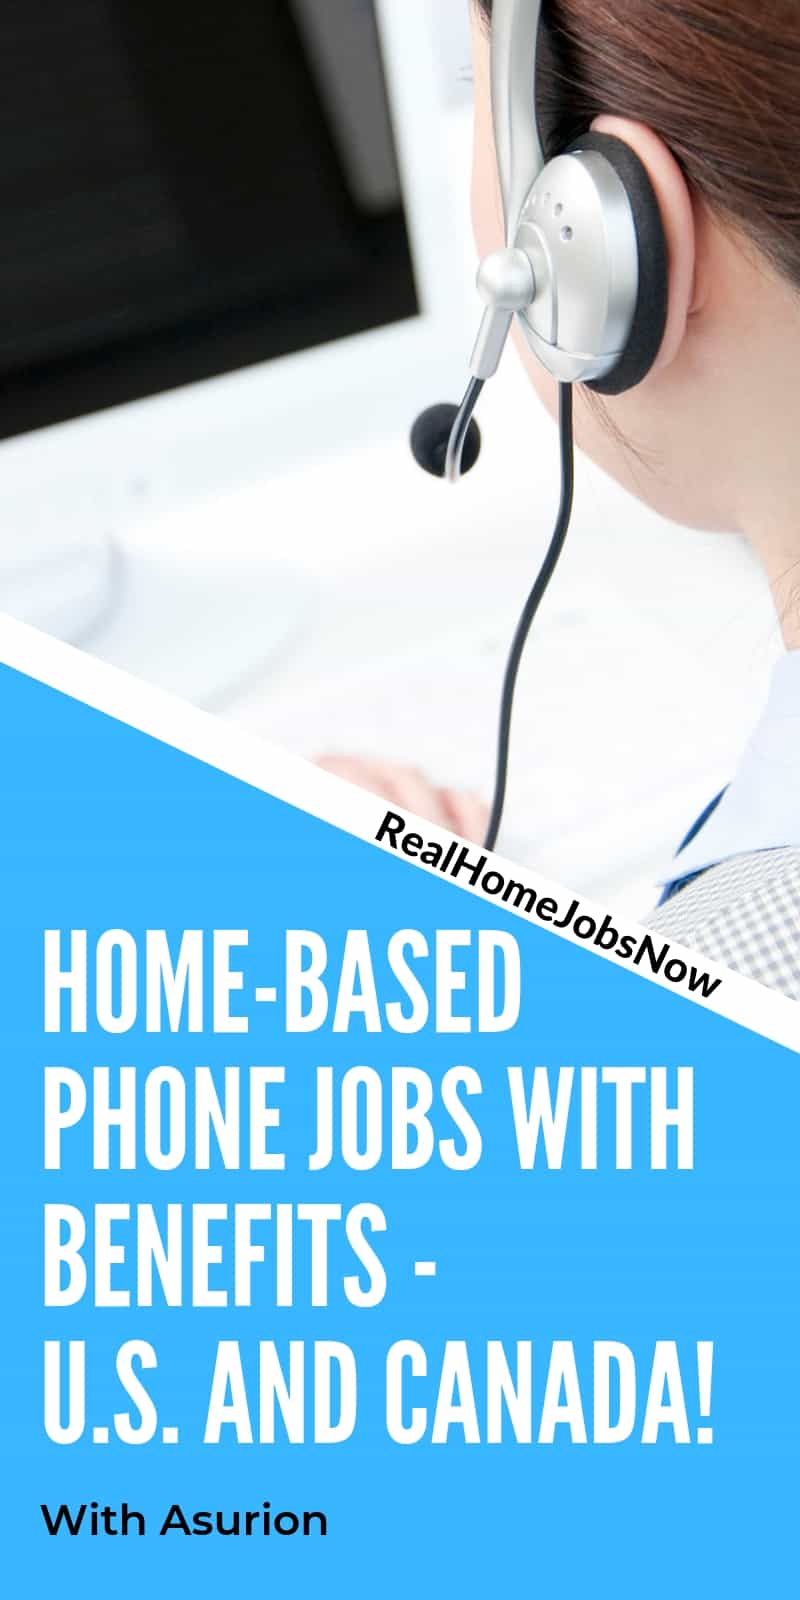 Asurion Review: Work at Home Customer Care Job with Benefits